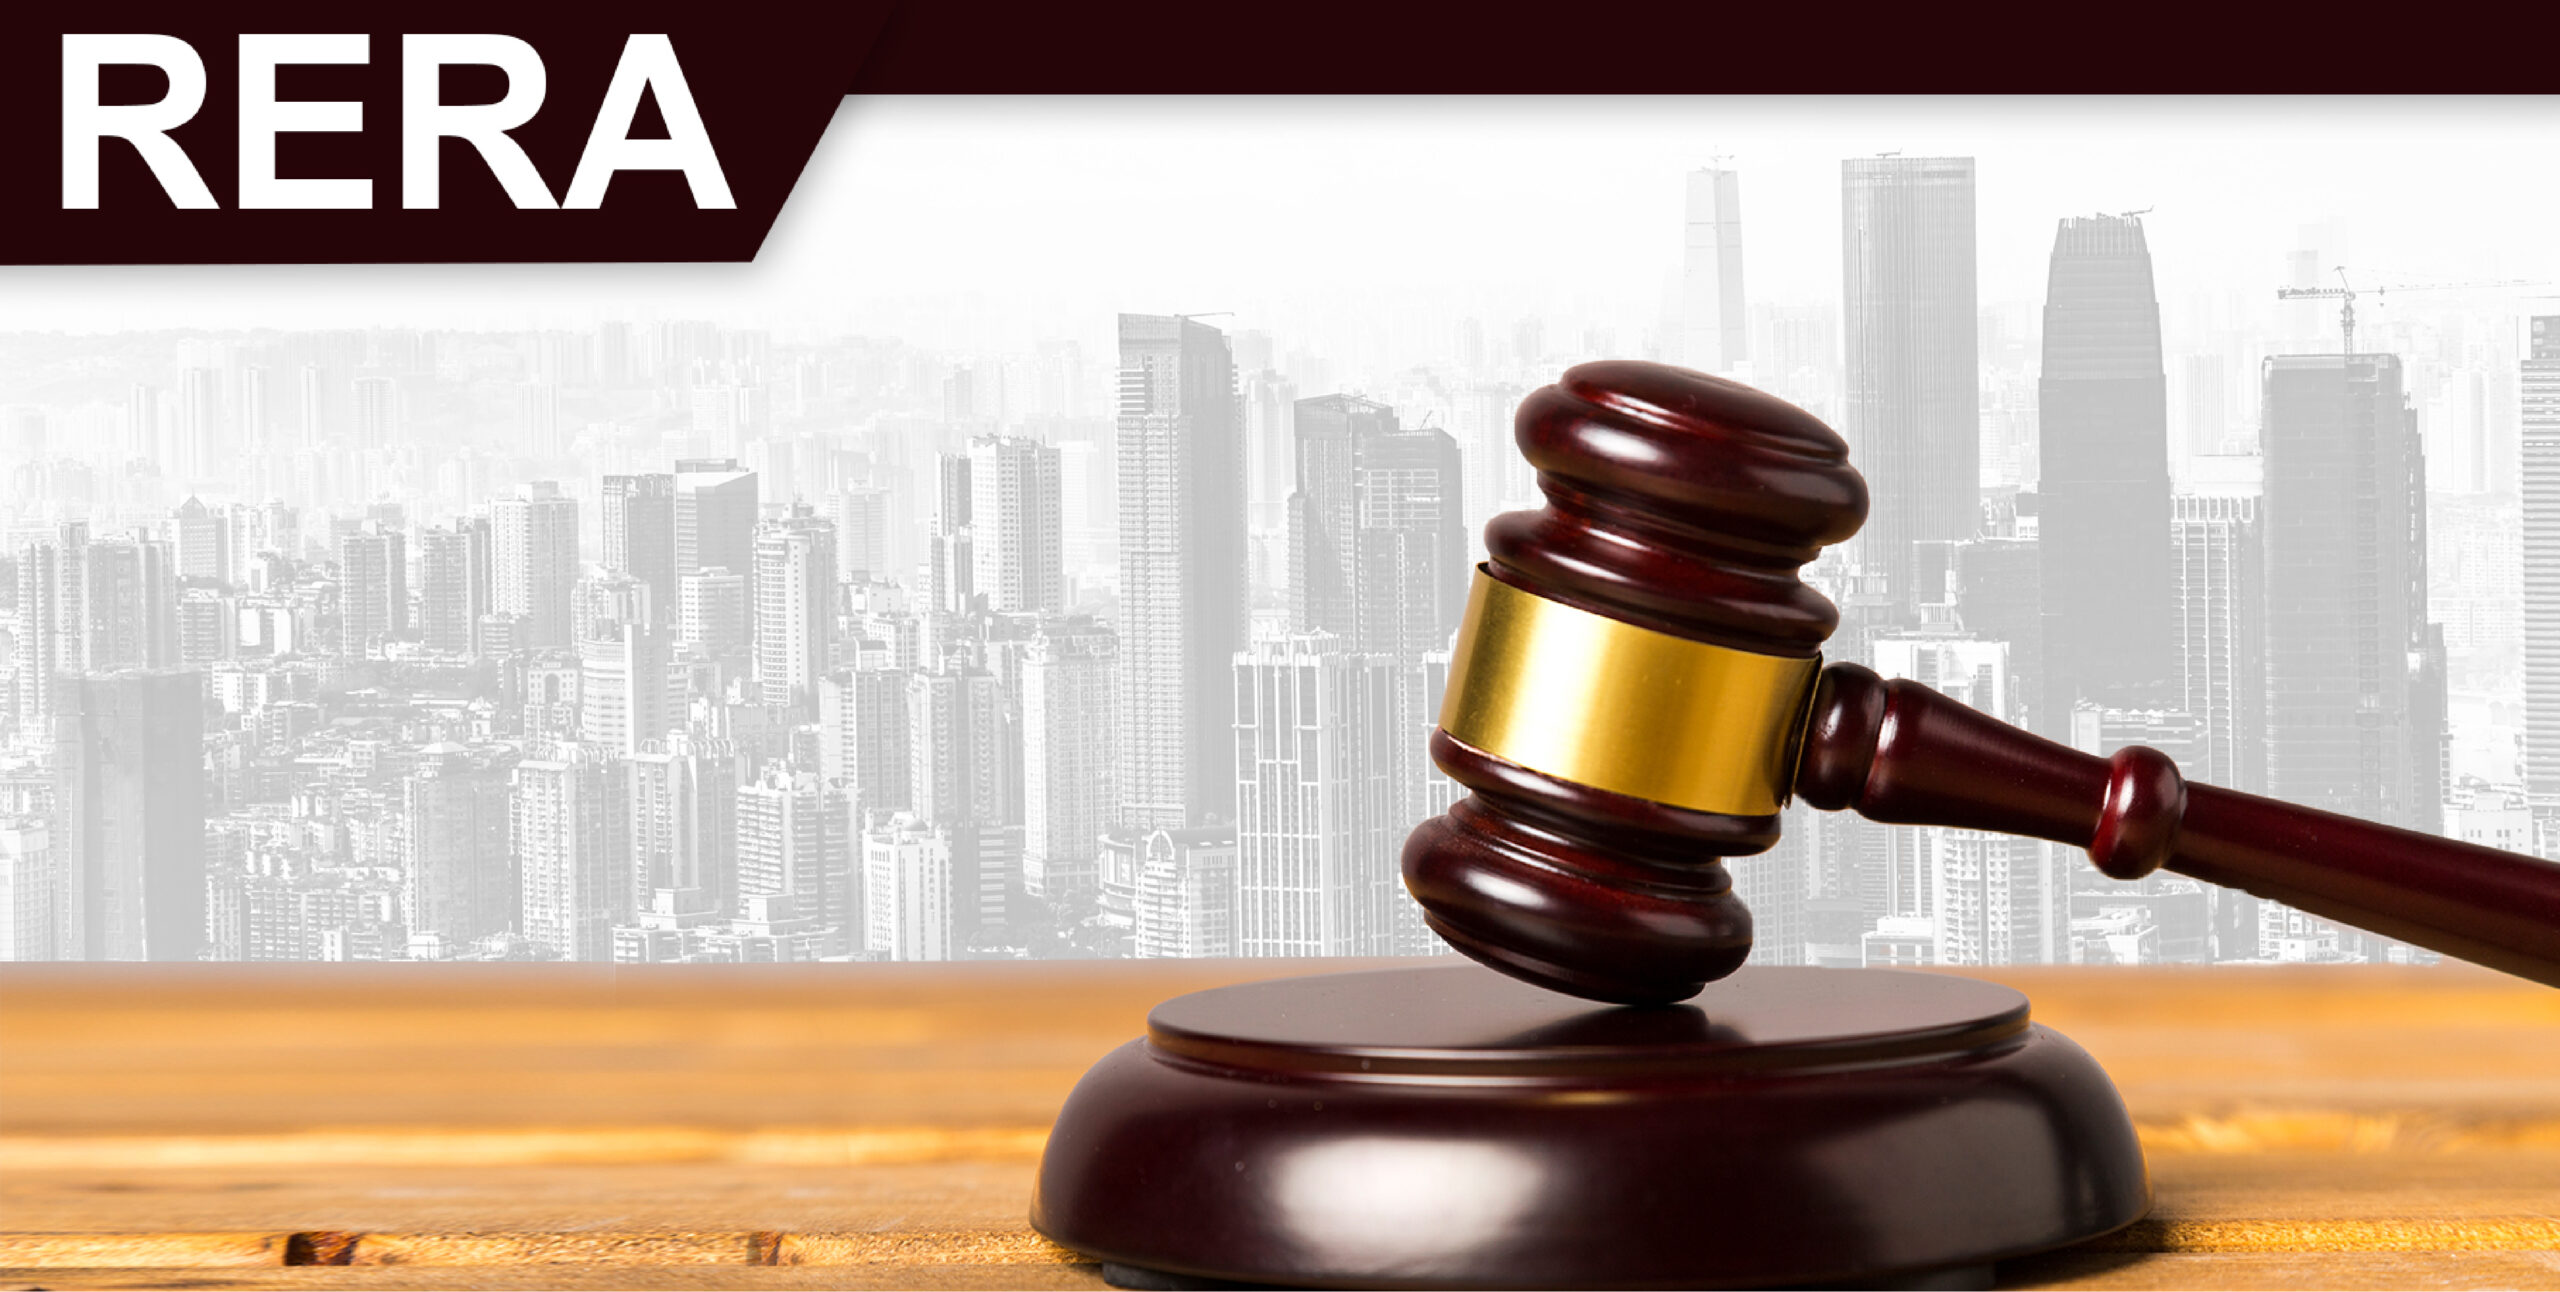 RERA and its impact on Real Estate.